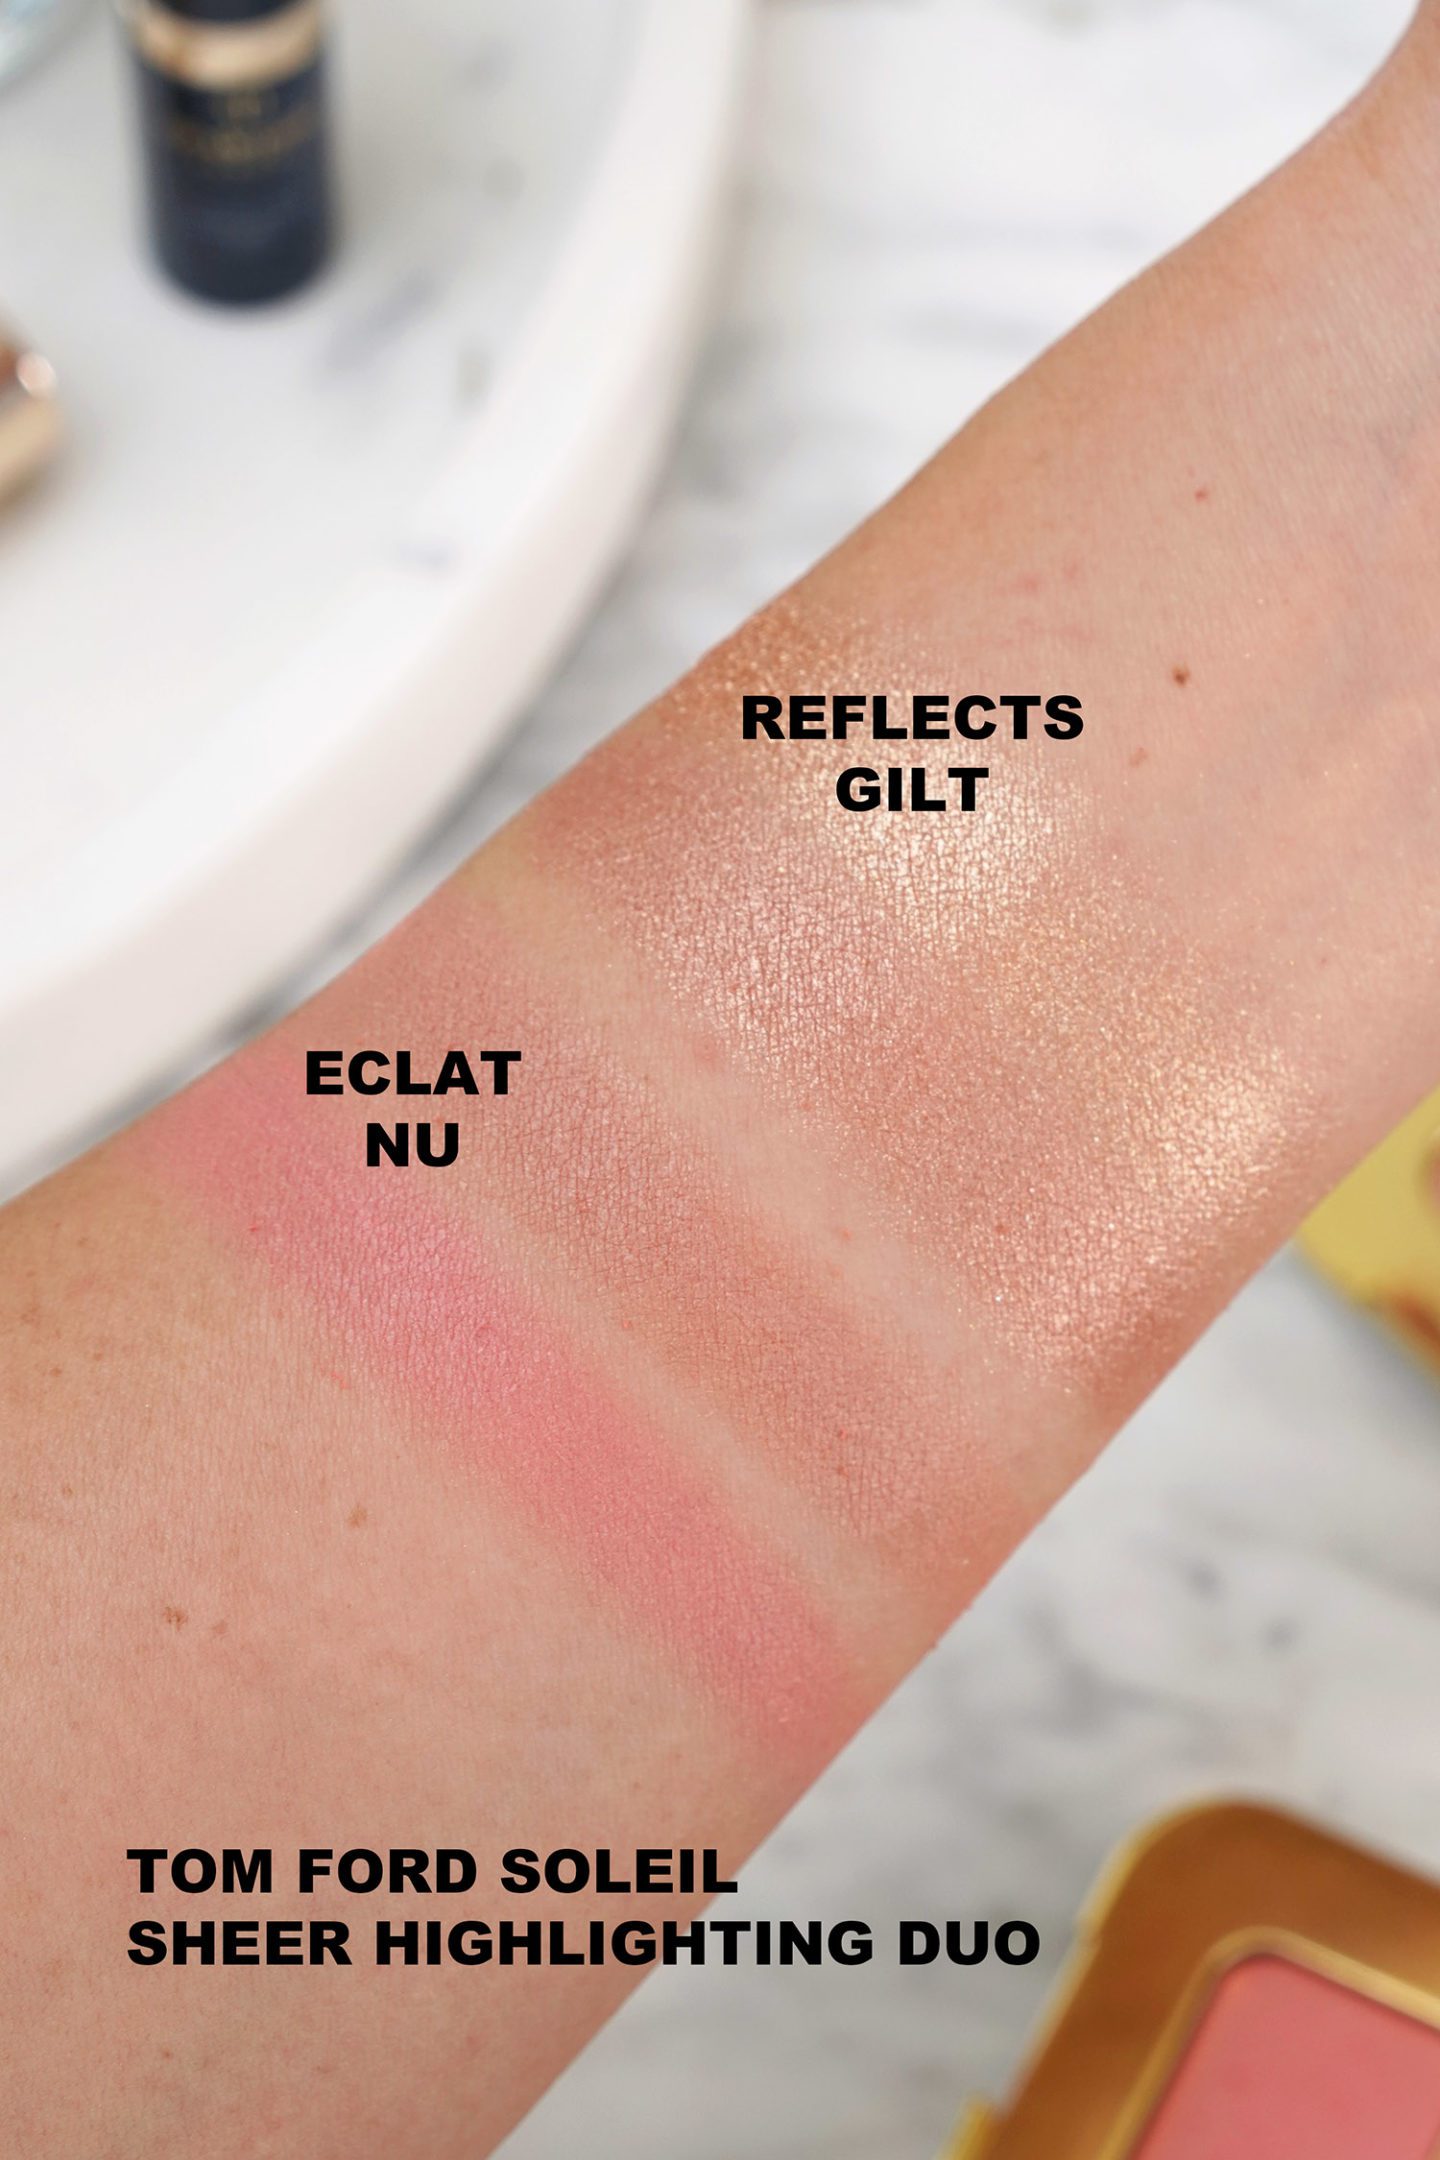 Tom Ford Sheer Cheek Duo Eclat Nu vs Reflects Gilt swatches